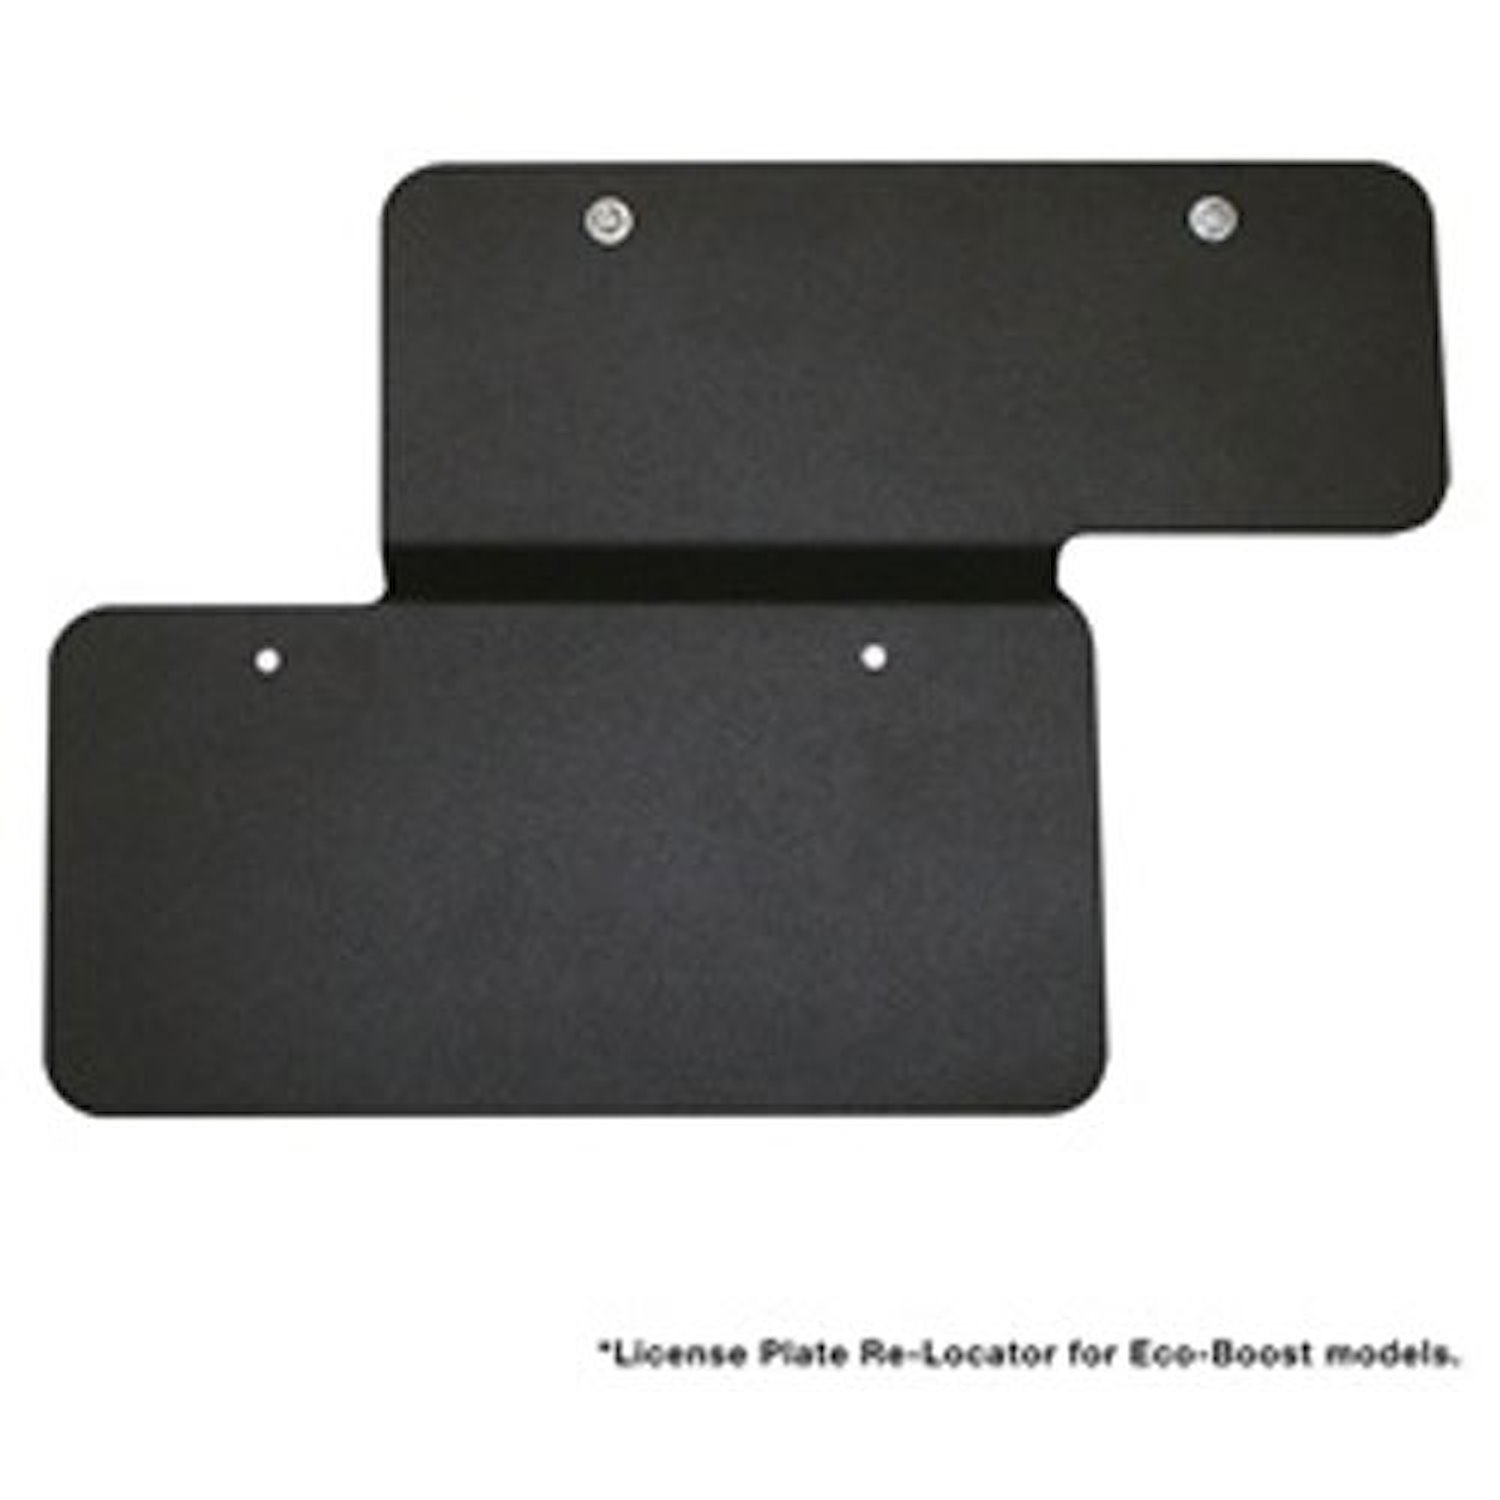 License Plate Relocation Bracket For Ford F-150 EcoBoost